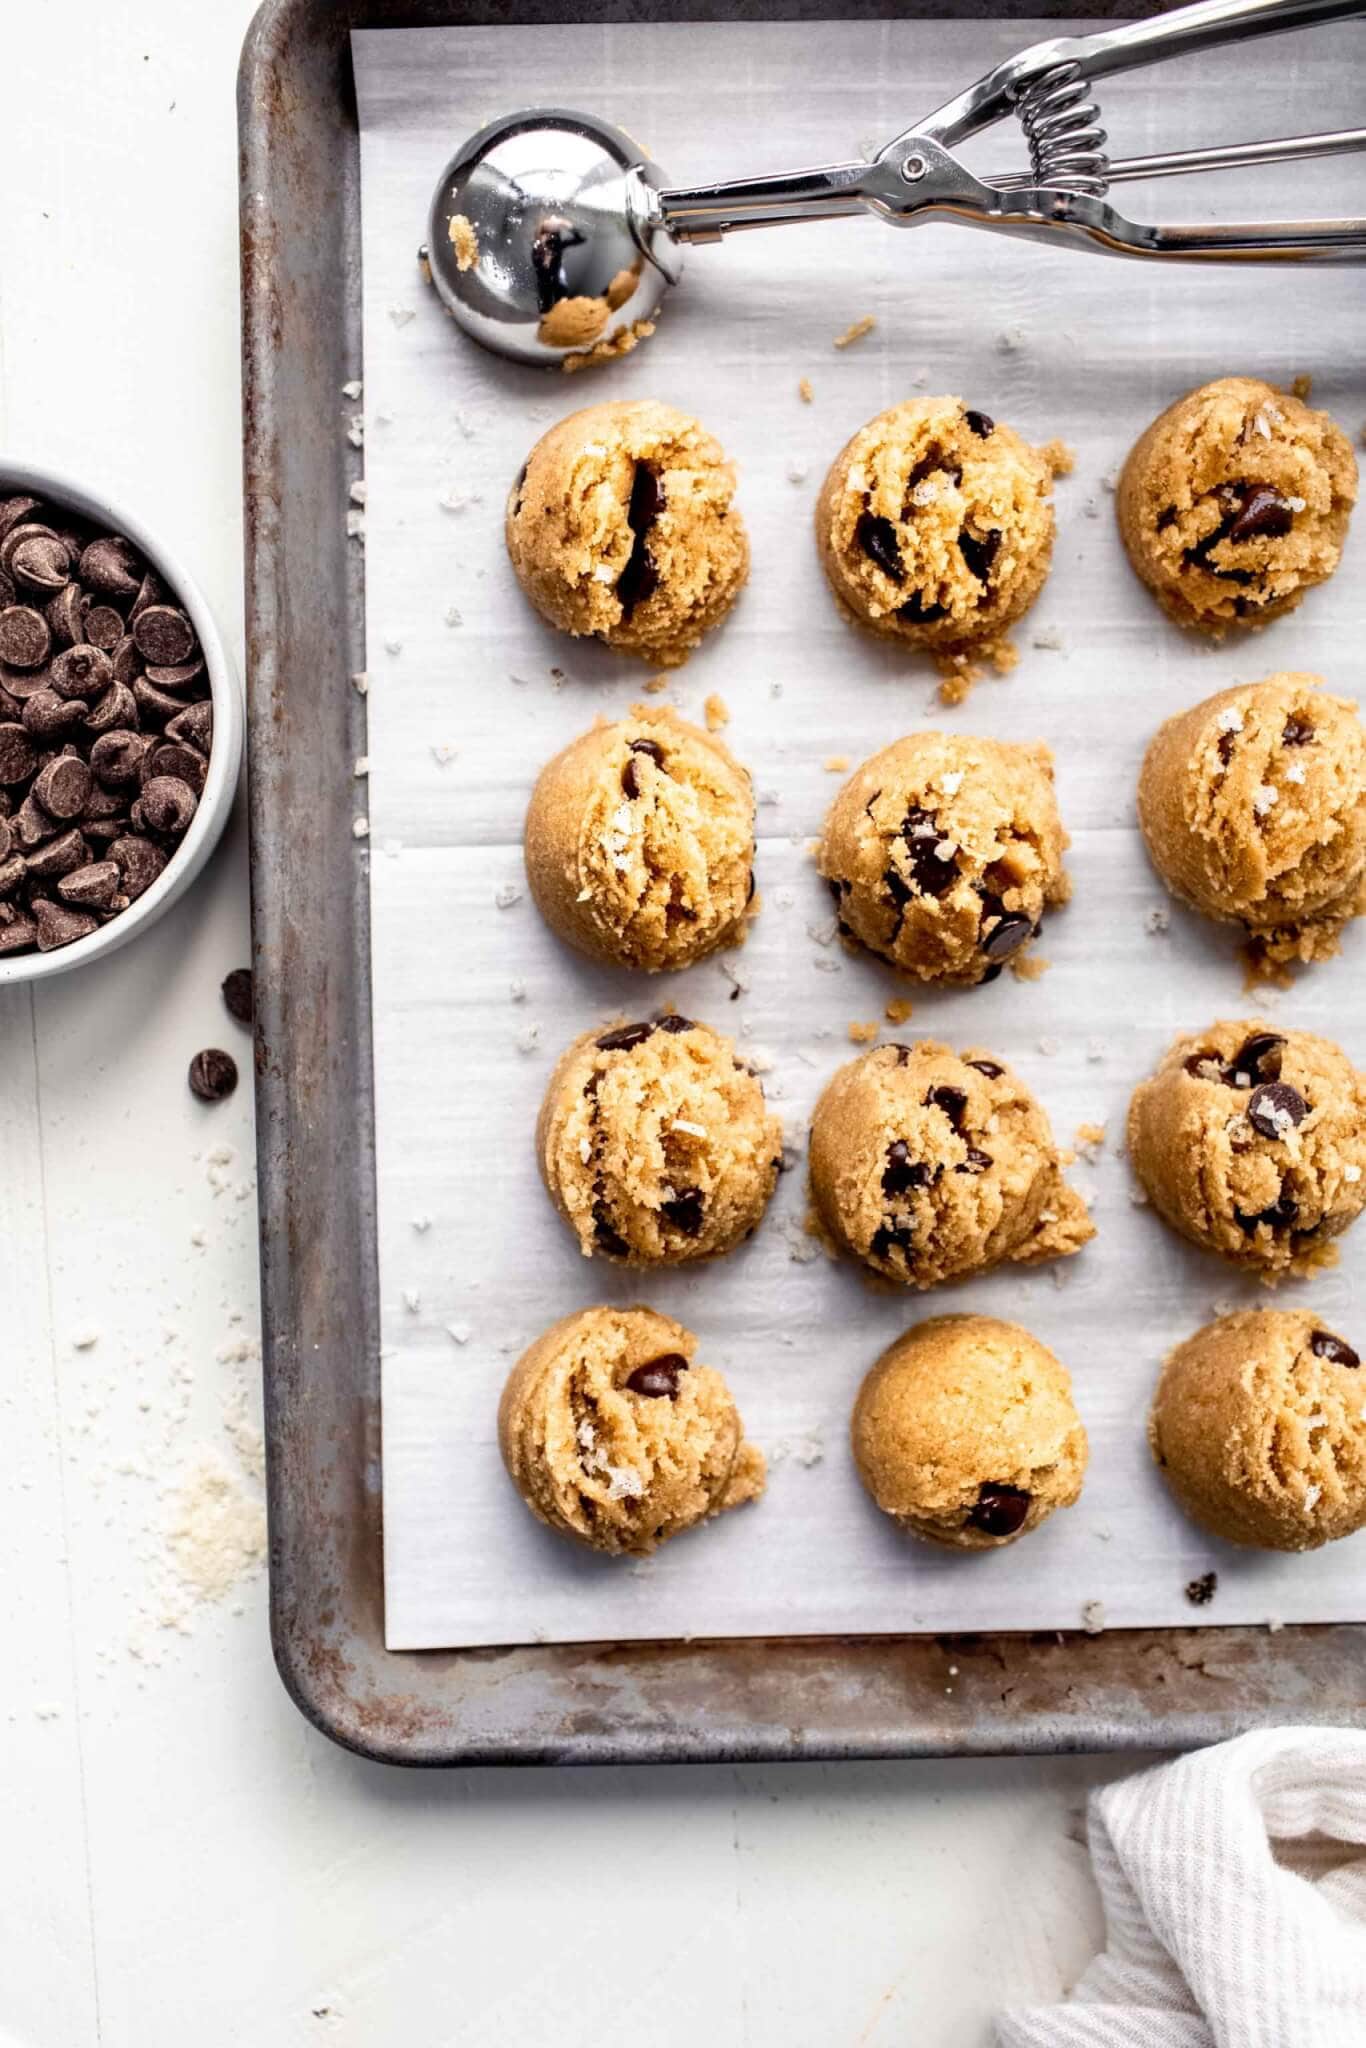 Cookie dough bites scooped out on parchment paper lined baking sheet